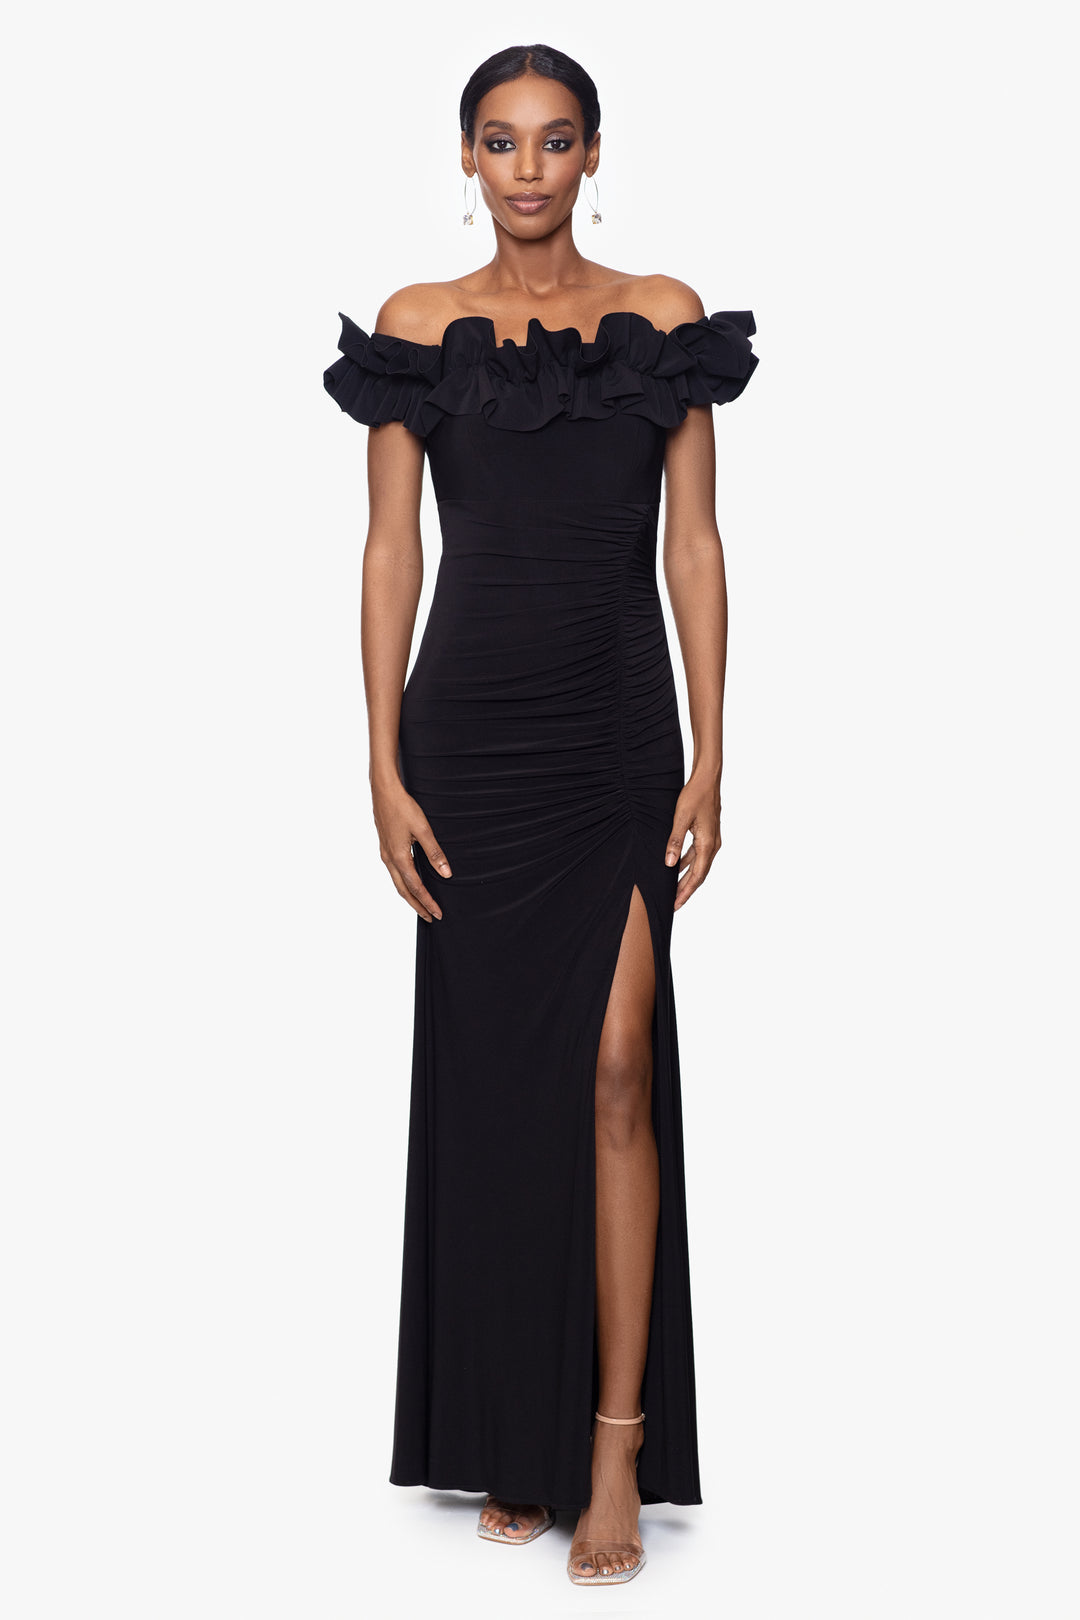 "Ruthie" Long Jersey Knit Off the Shoulder Ruffle Top Dress